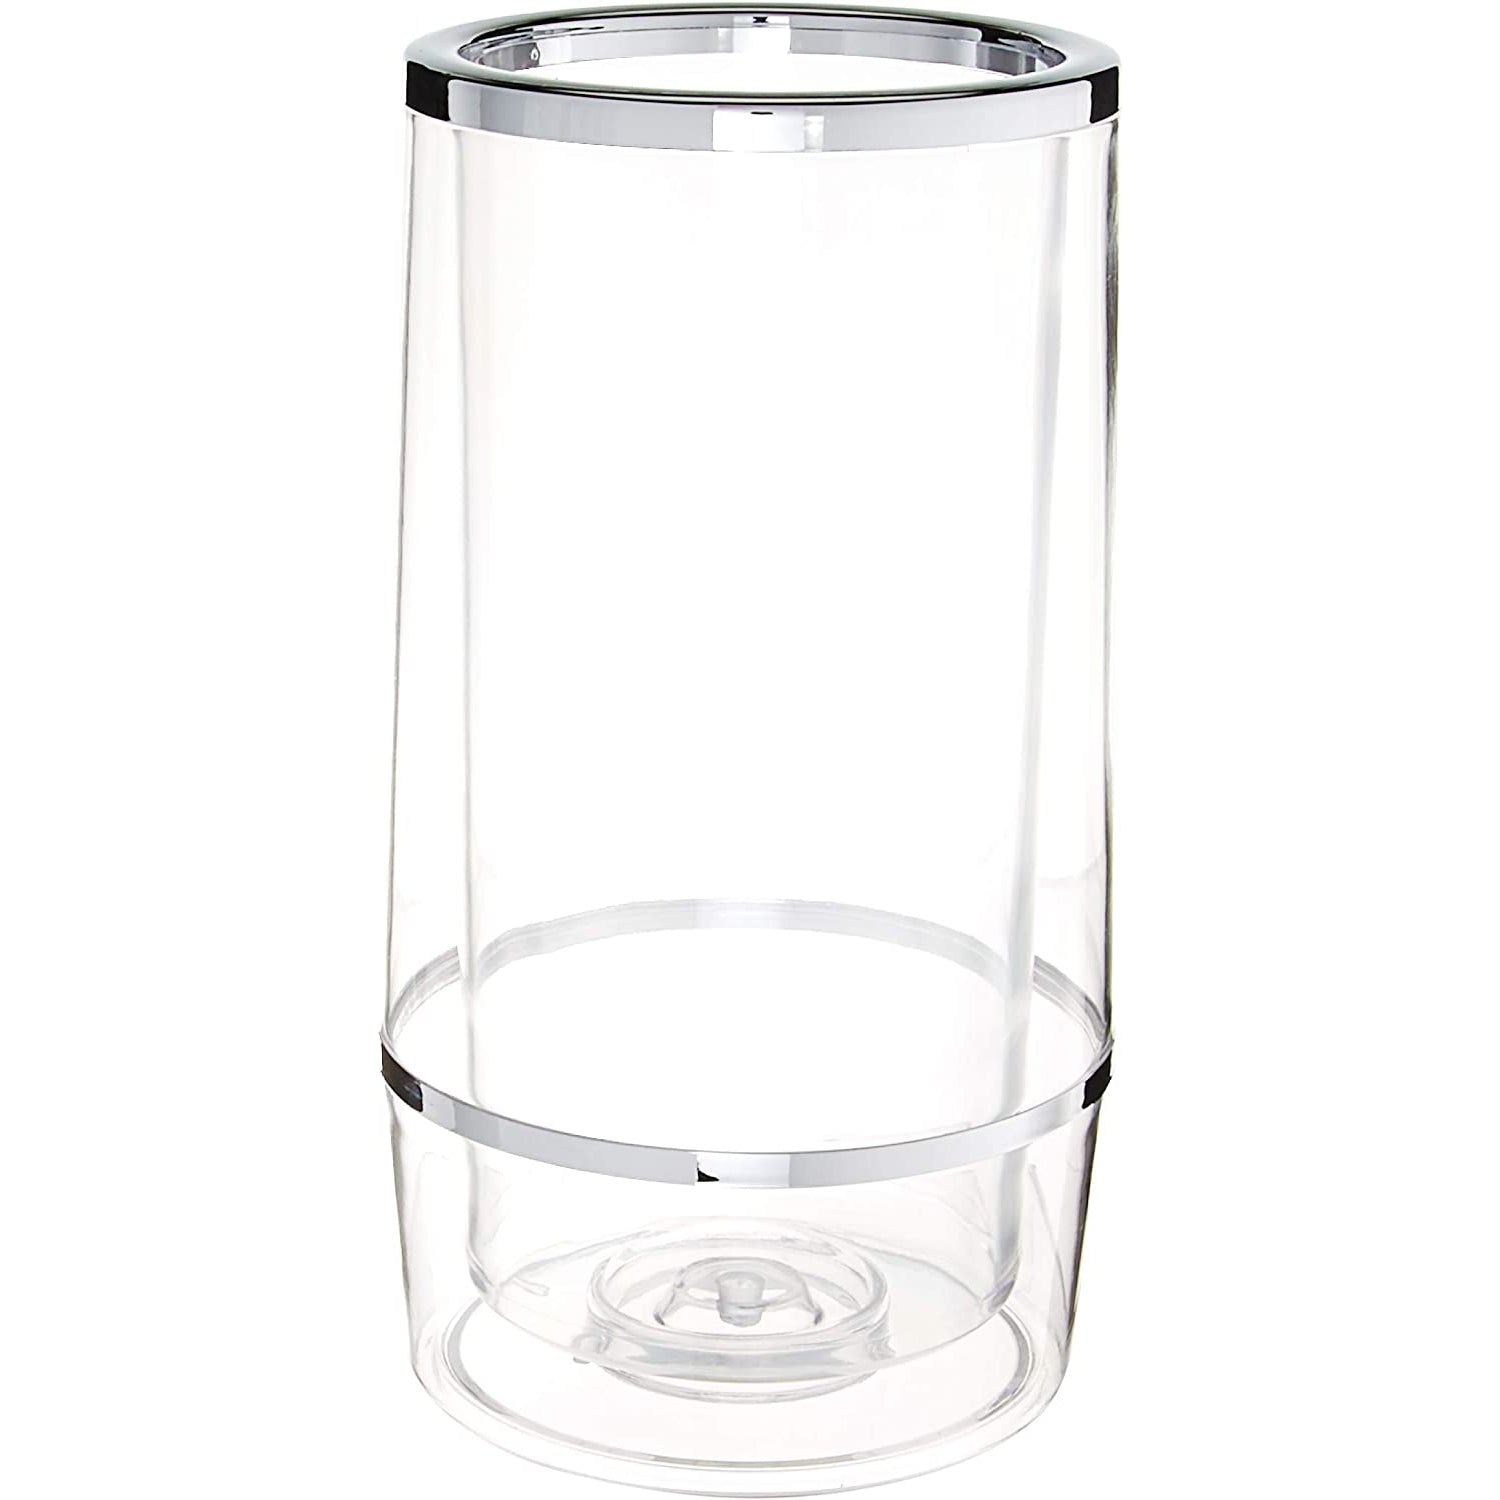 double wall clear acrylic rust and shatter resistant cooler for wine and champagne keep 750ml standard bottles cooled condensation free and safe for longer times